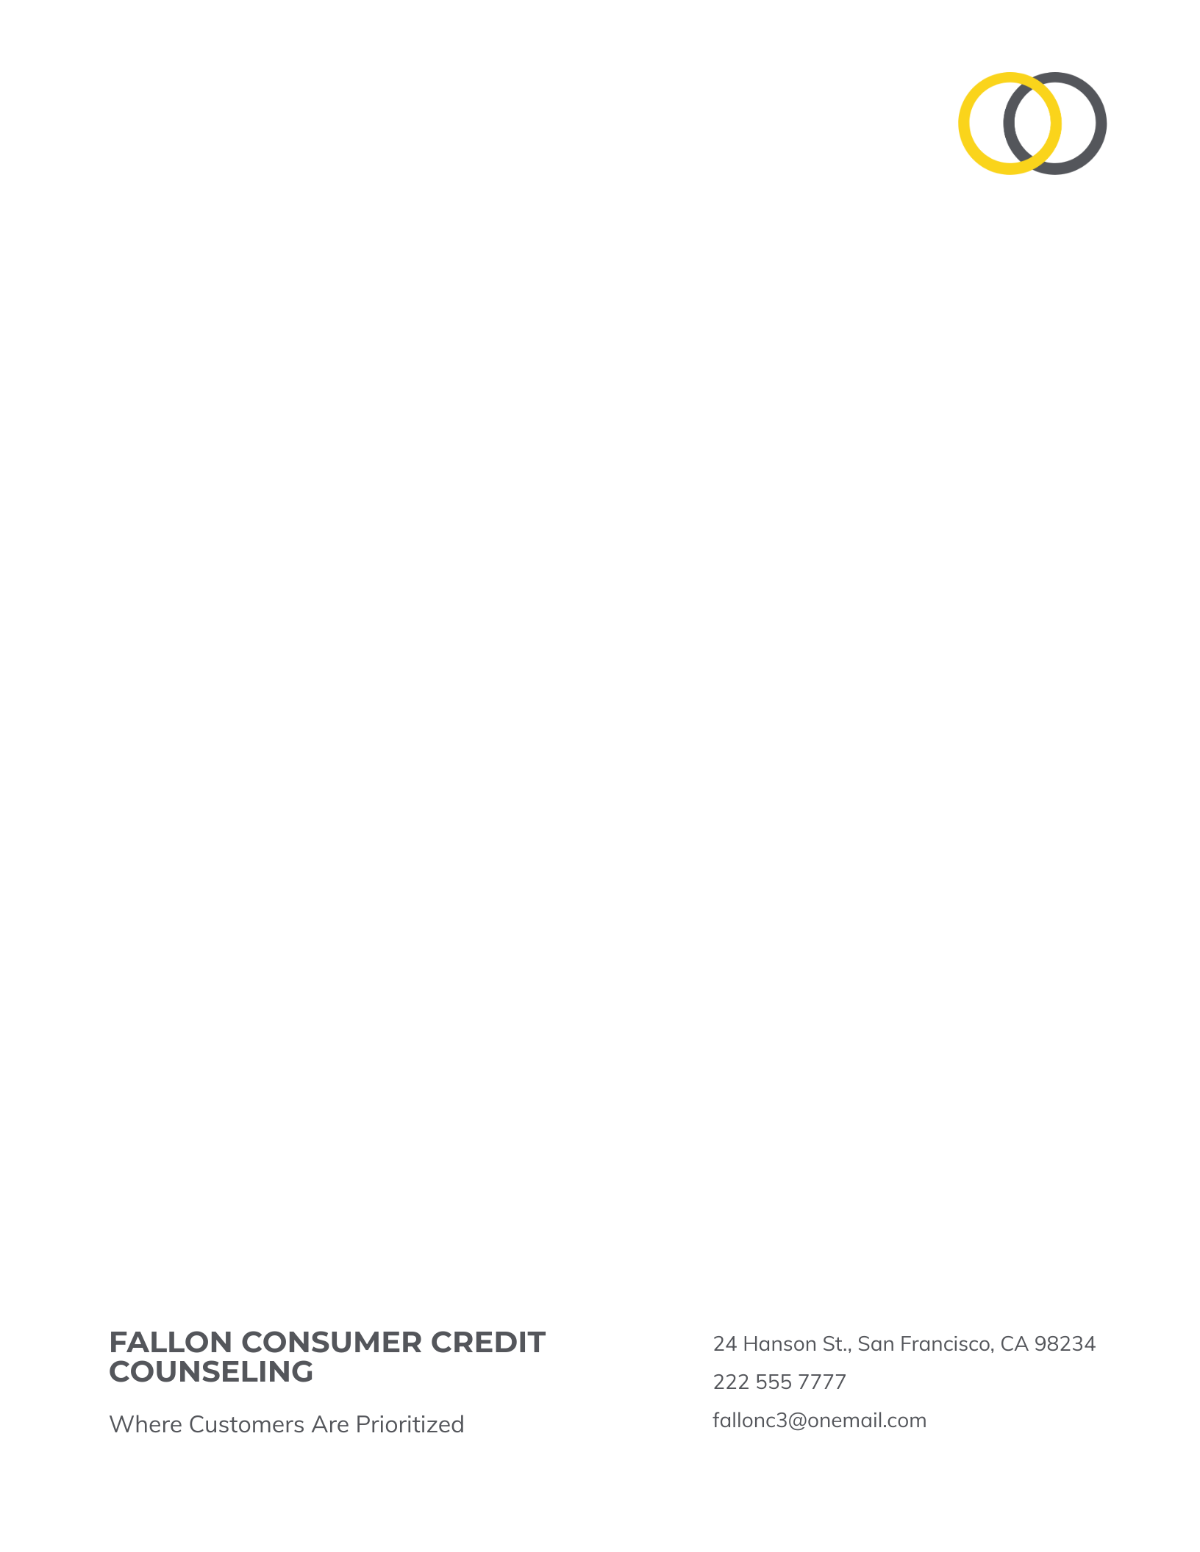 Consumer Credit Counseling Letterhead